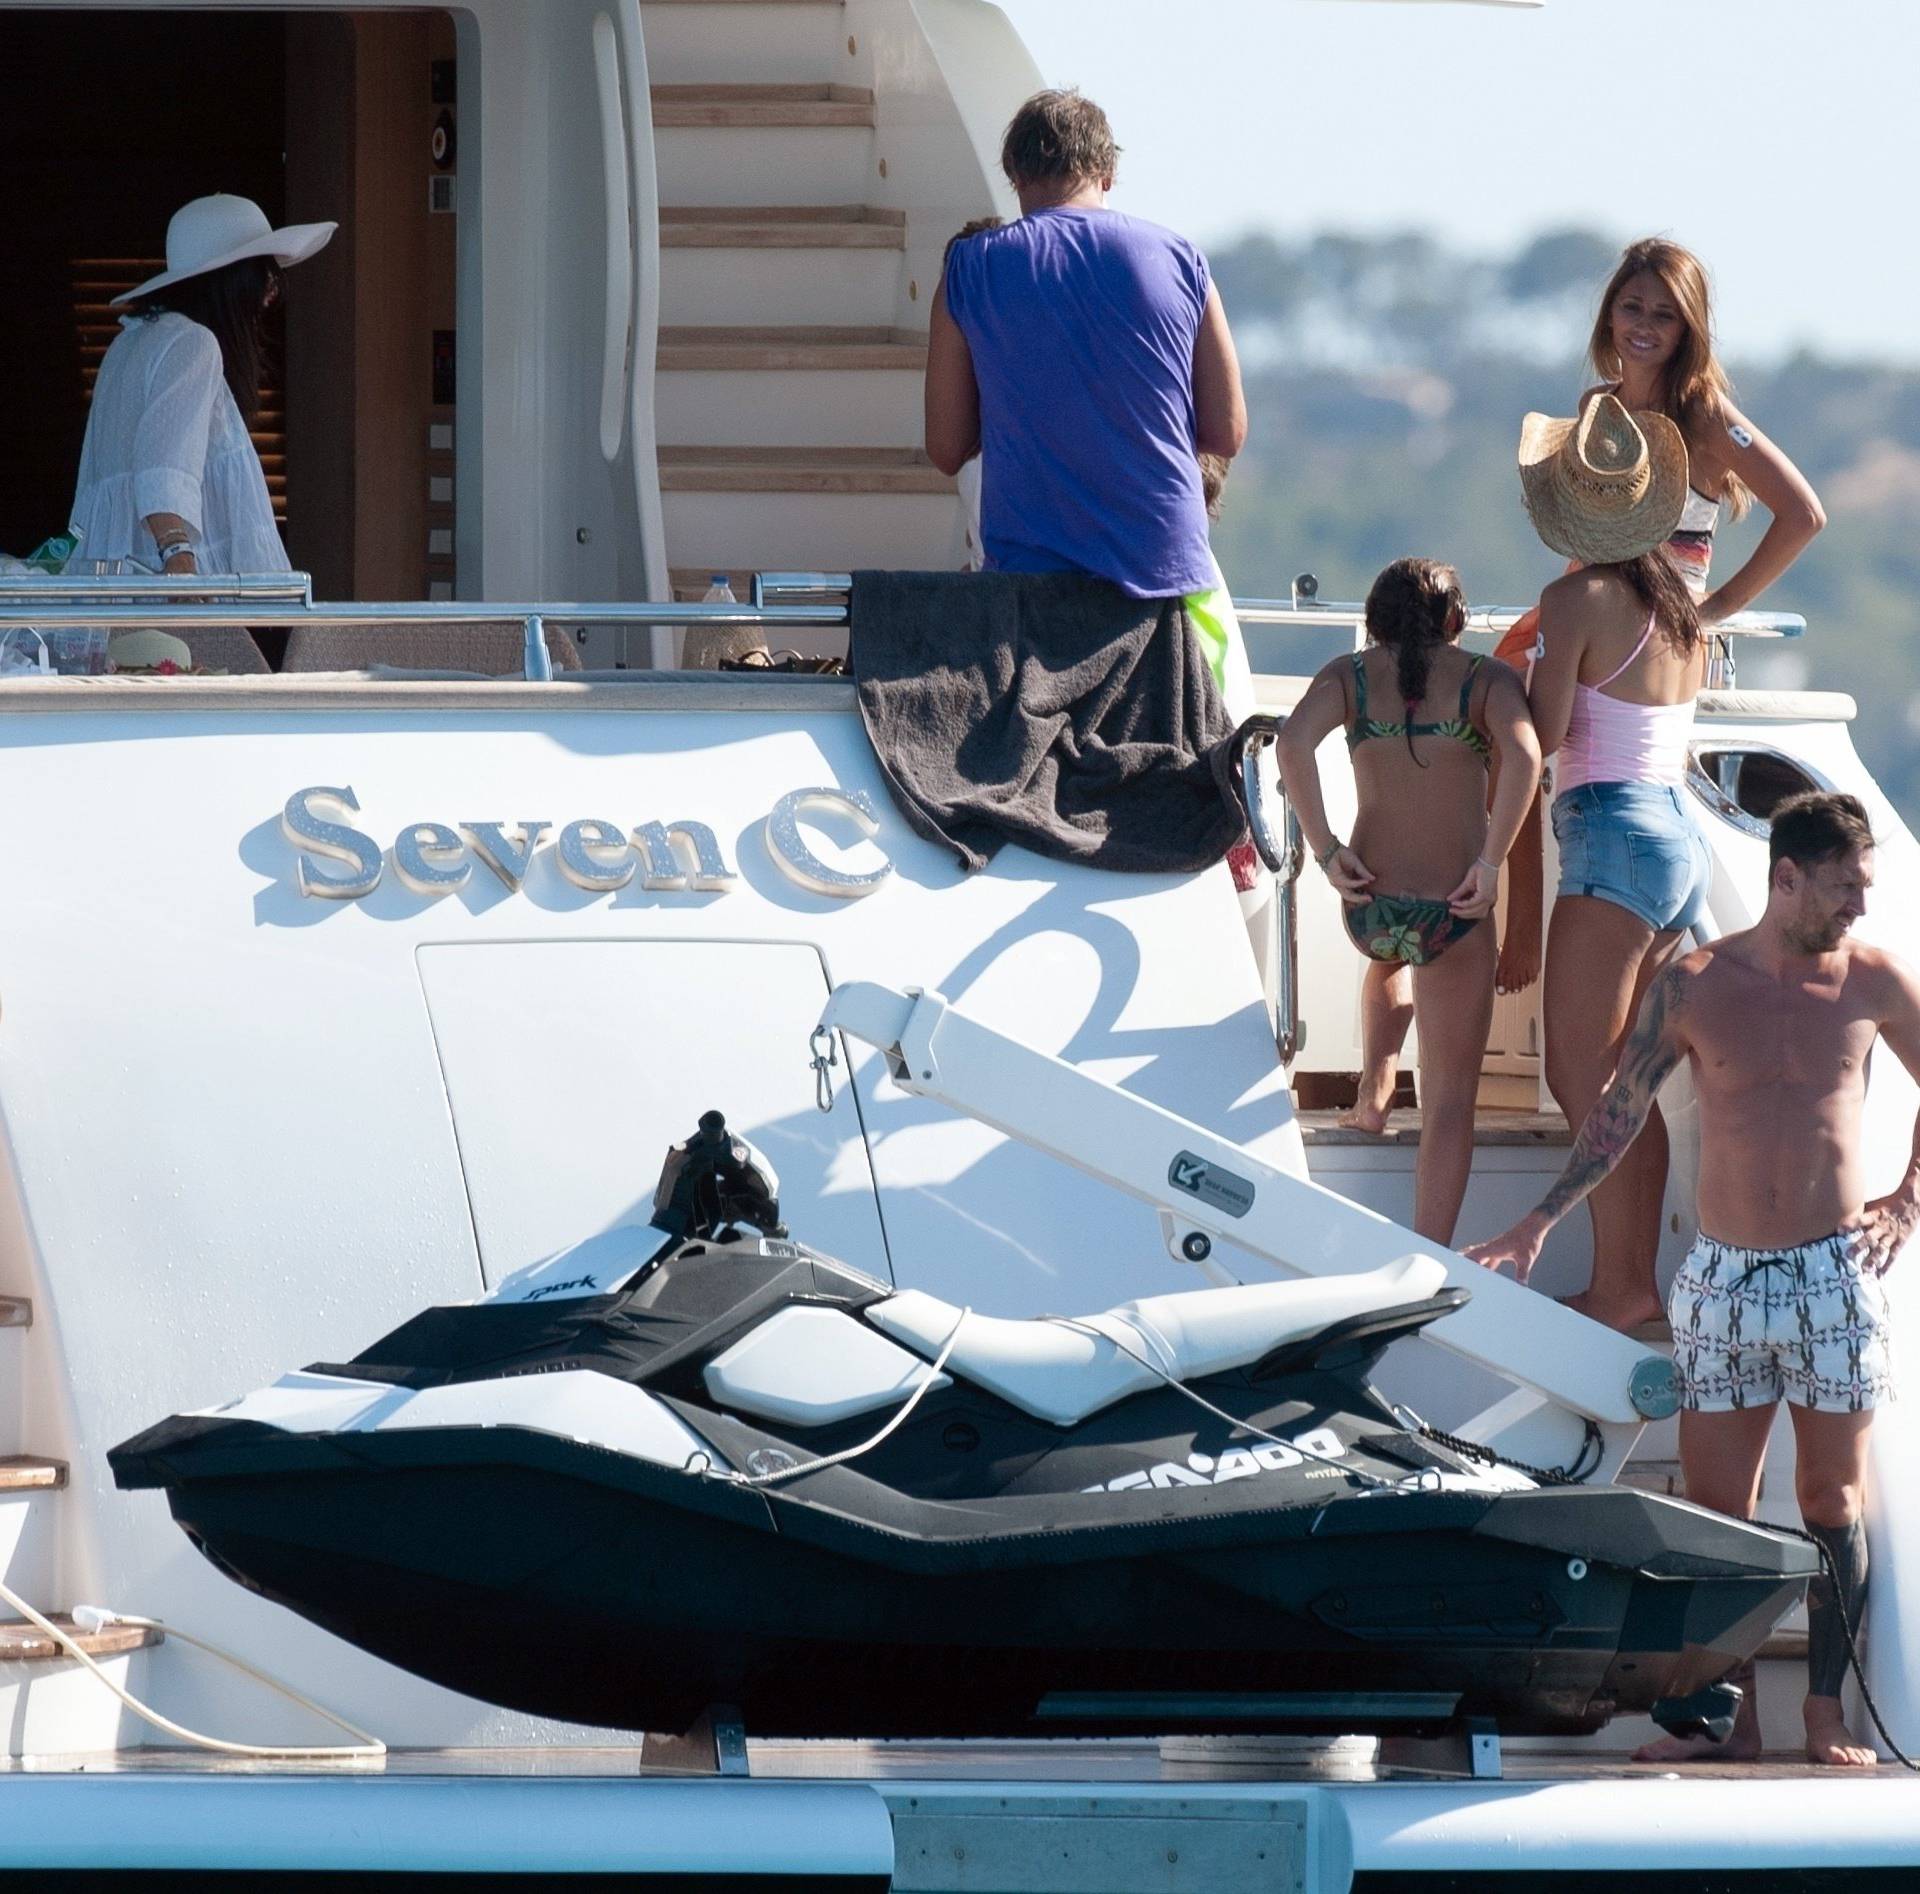 Cesc Fabregas is joined by wife Daniella Semaan as they accompany Lionel Messi, Luis Suarez and their families aboard a luxury yacht during holidays in Ibiza